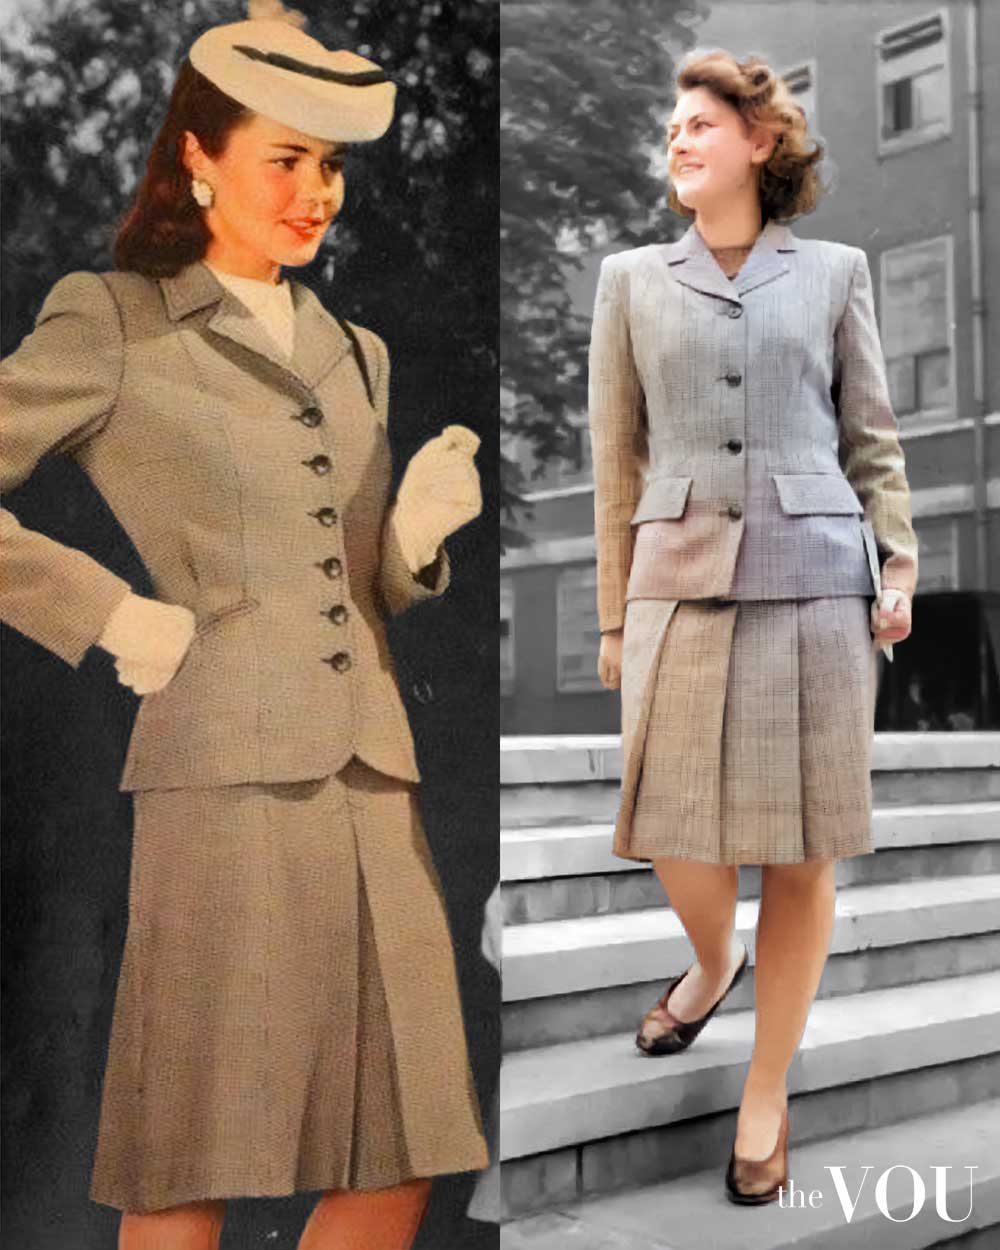 The Utility Suits in the 1940s fashion